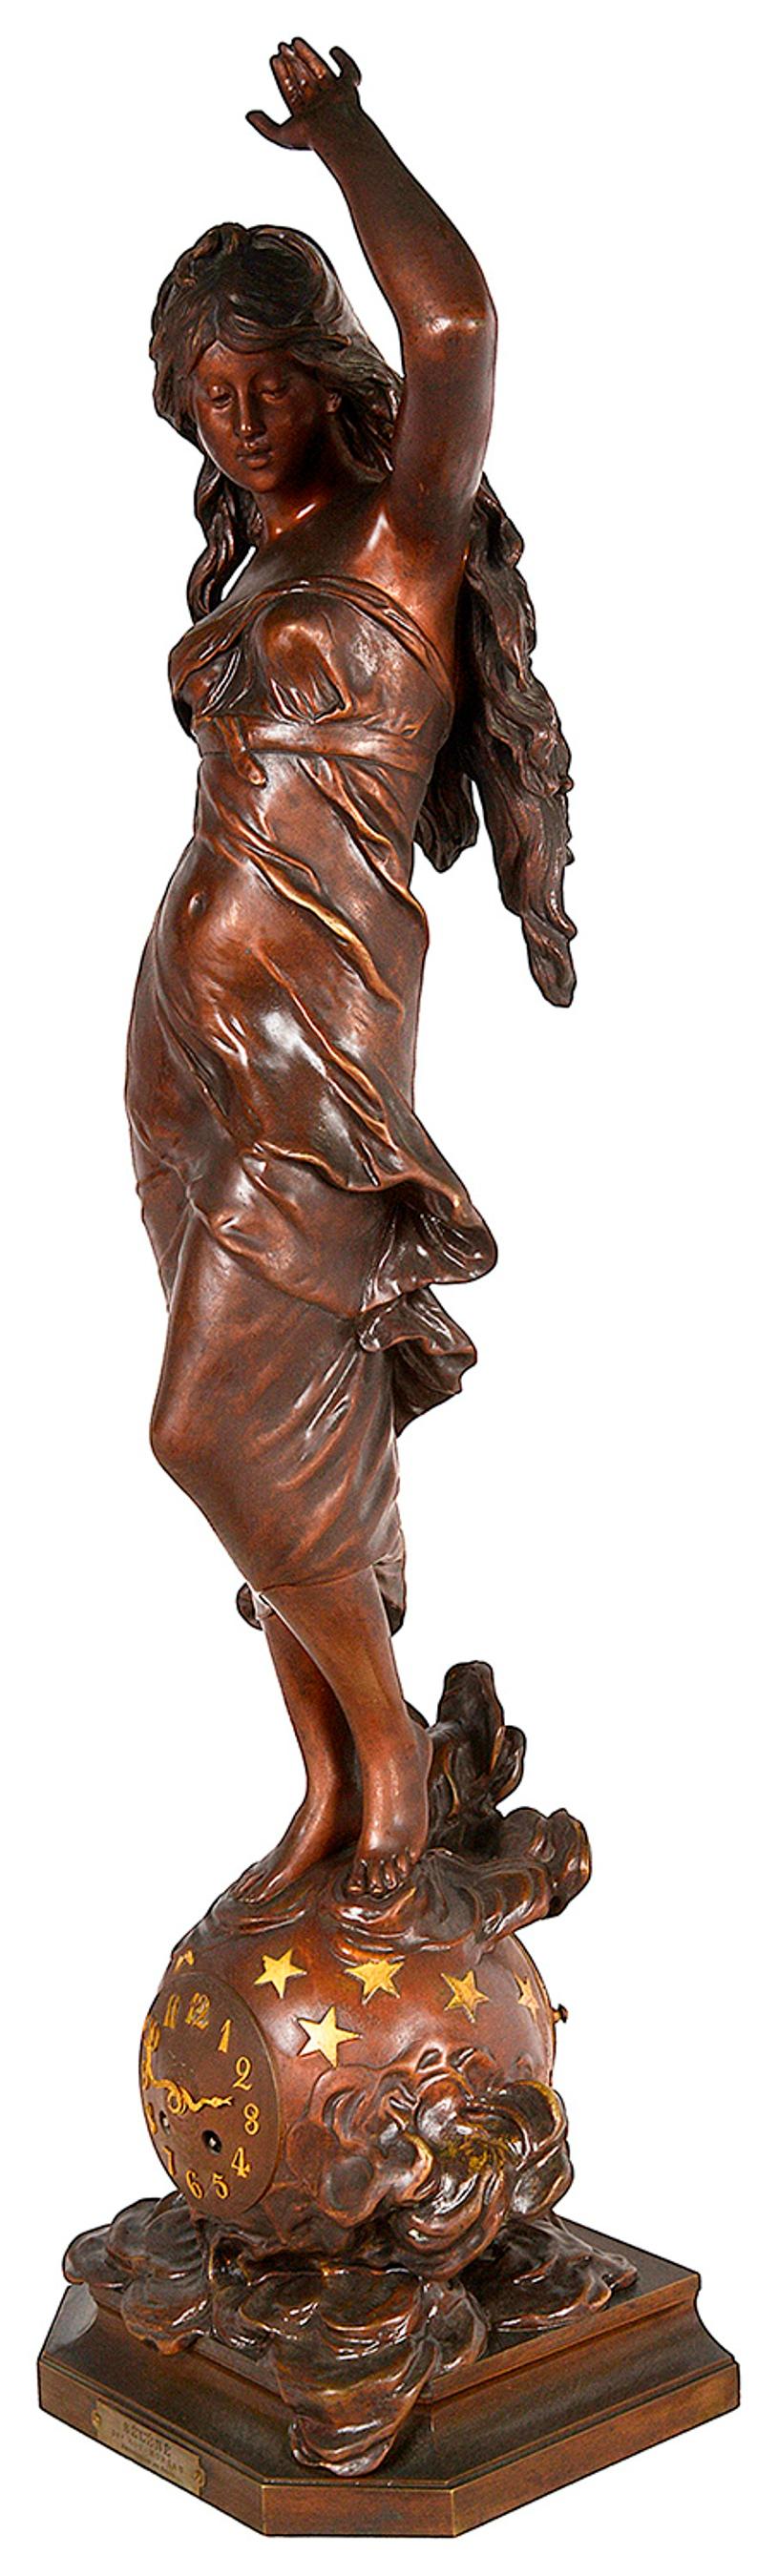 Bronze sculpture with brown patina including a clock and signed Auguste Moreau. It features a woman wearing a flowing dress who is standing on a globe. The title printed on a small plaque reads: SÉLÉNÉ par Aug. MOREAU and is annotated with: